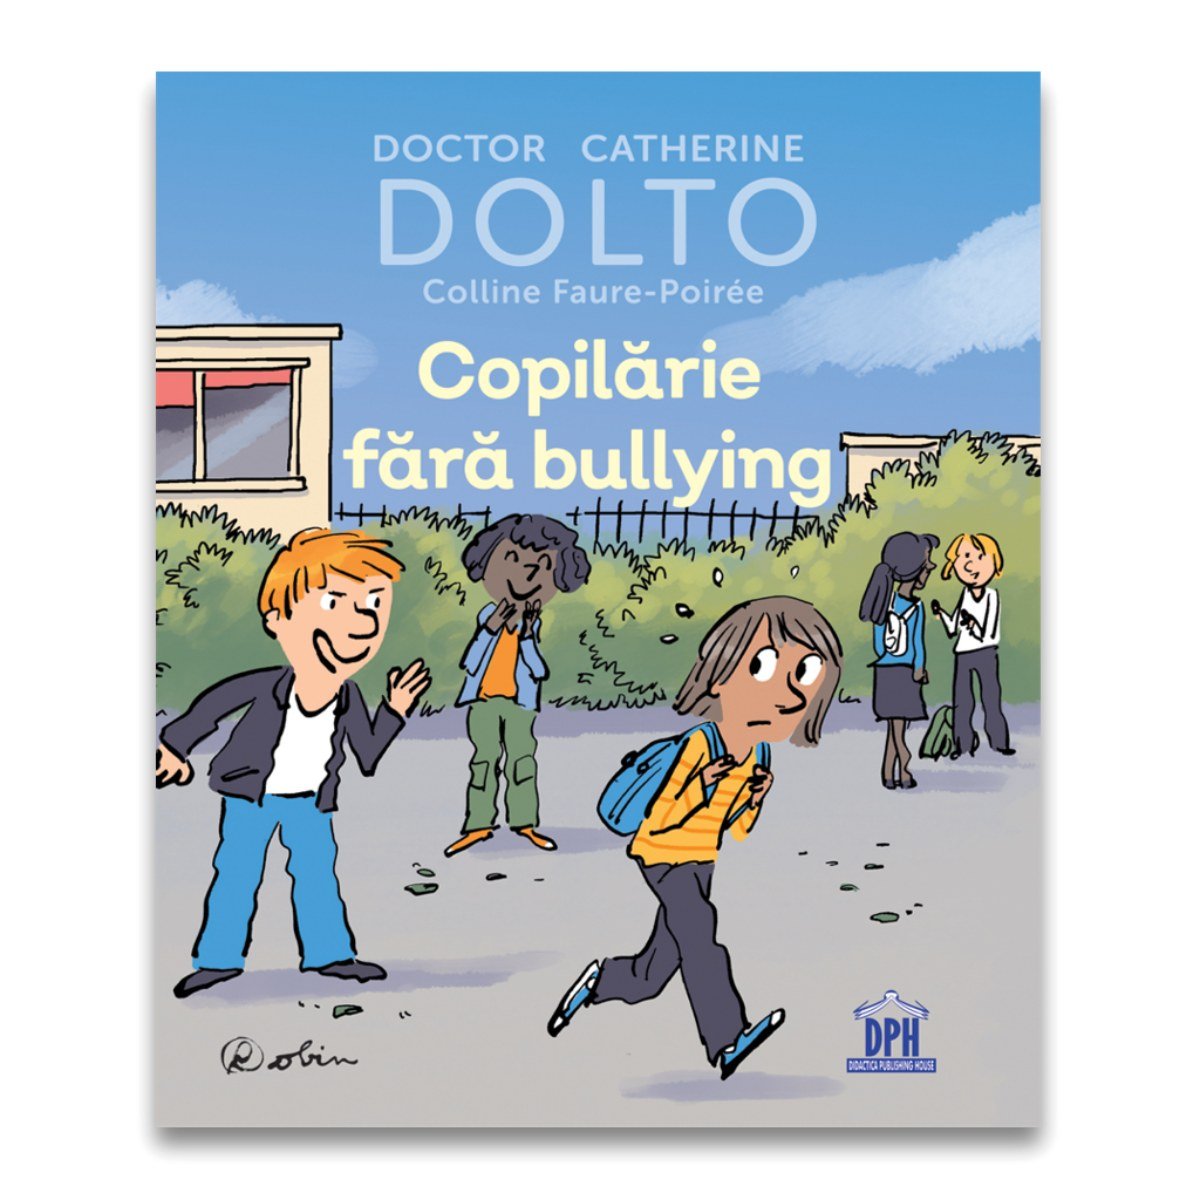 Copilarie fara bullying, Doctor Catherine Dolto, Colline Faure-Poiree